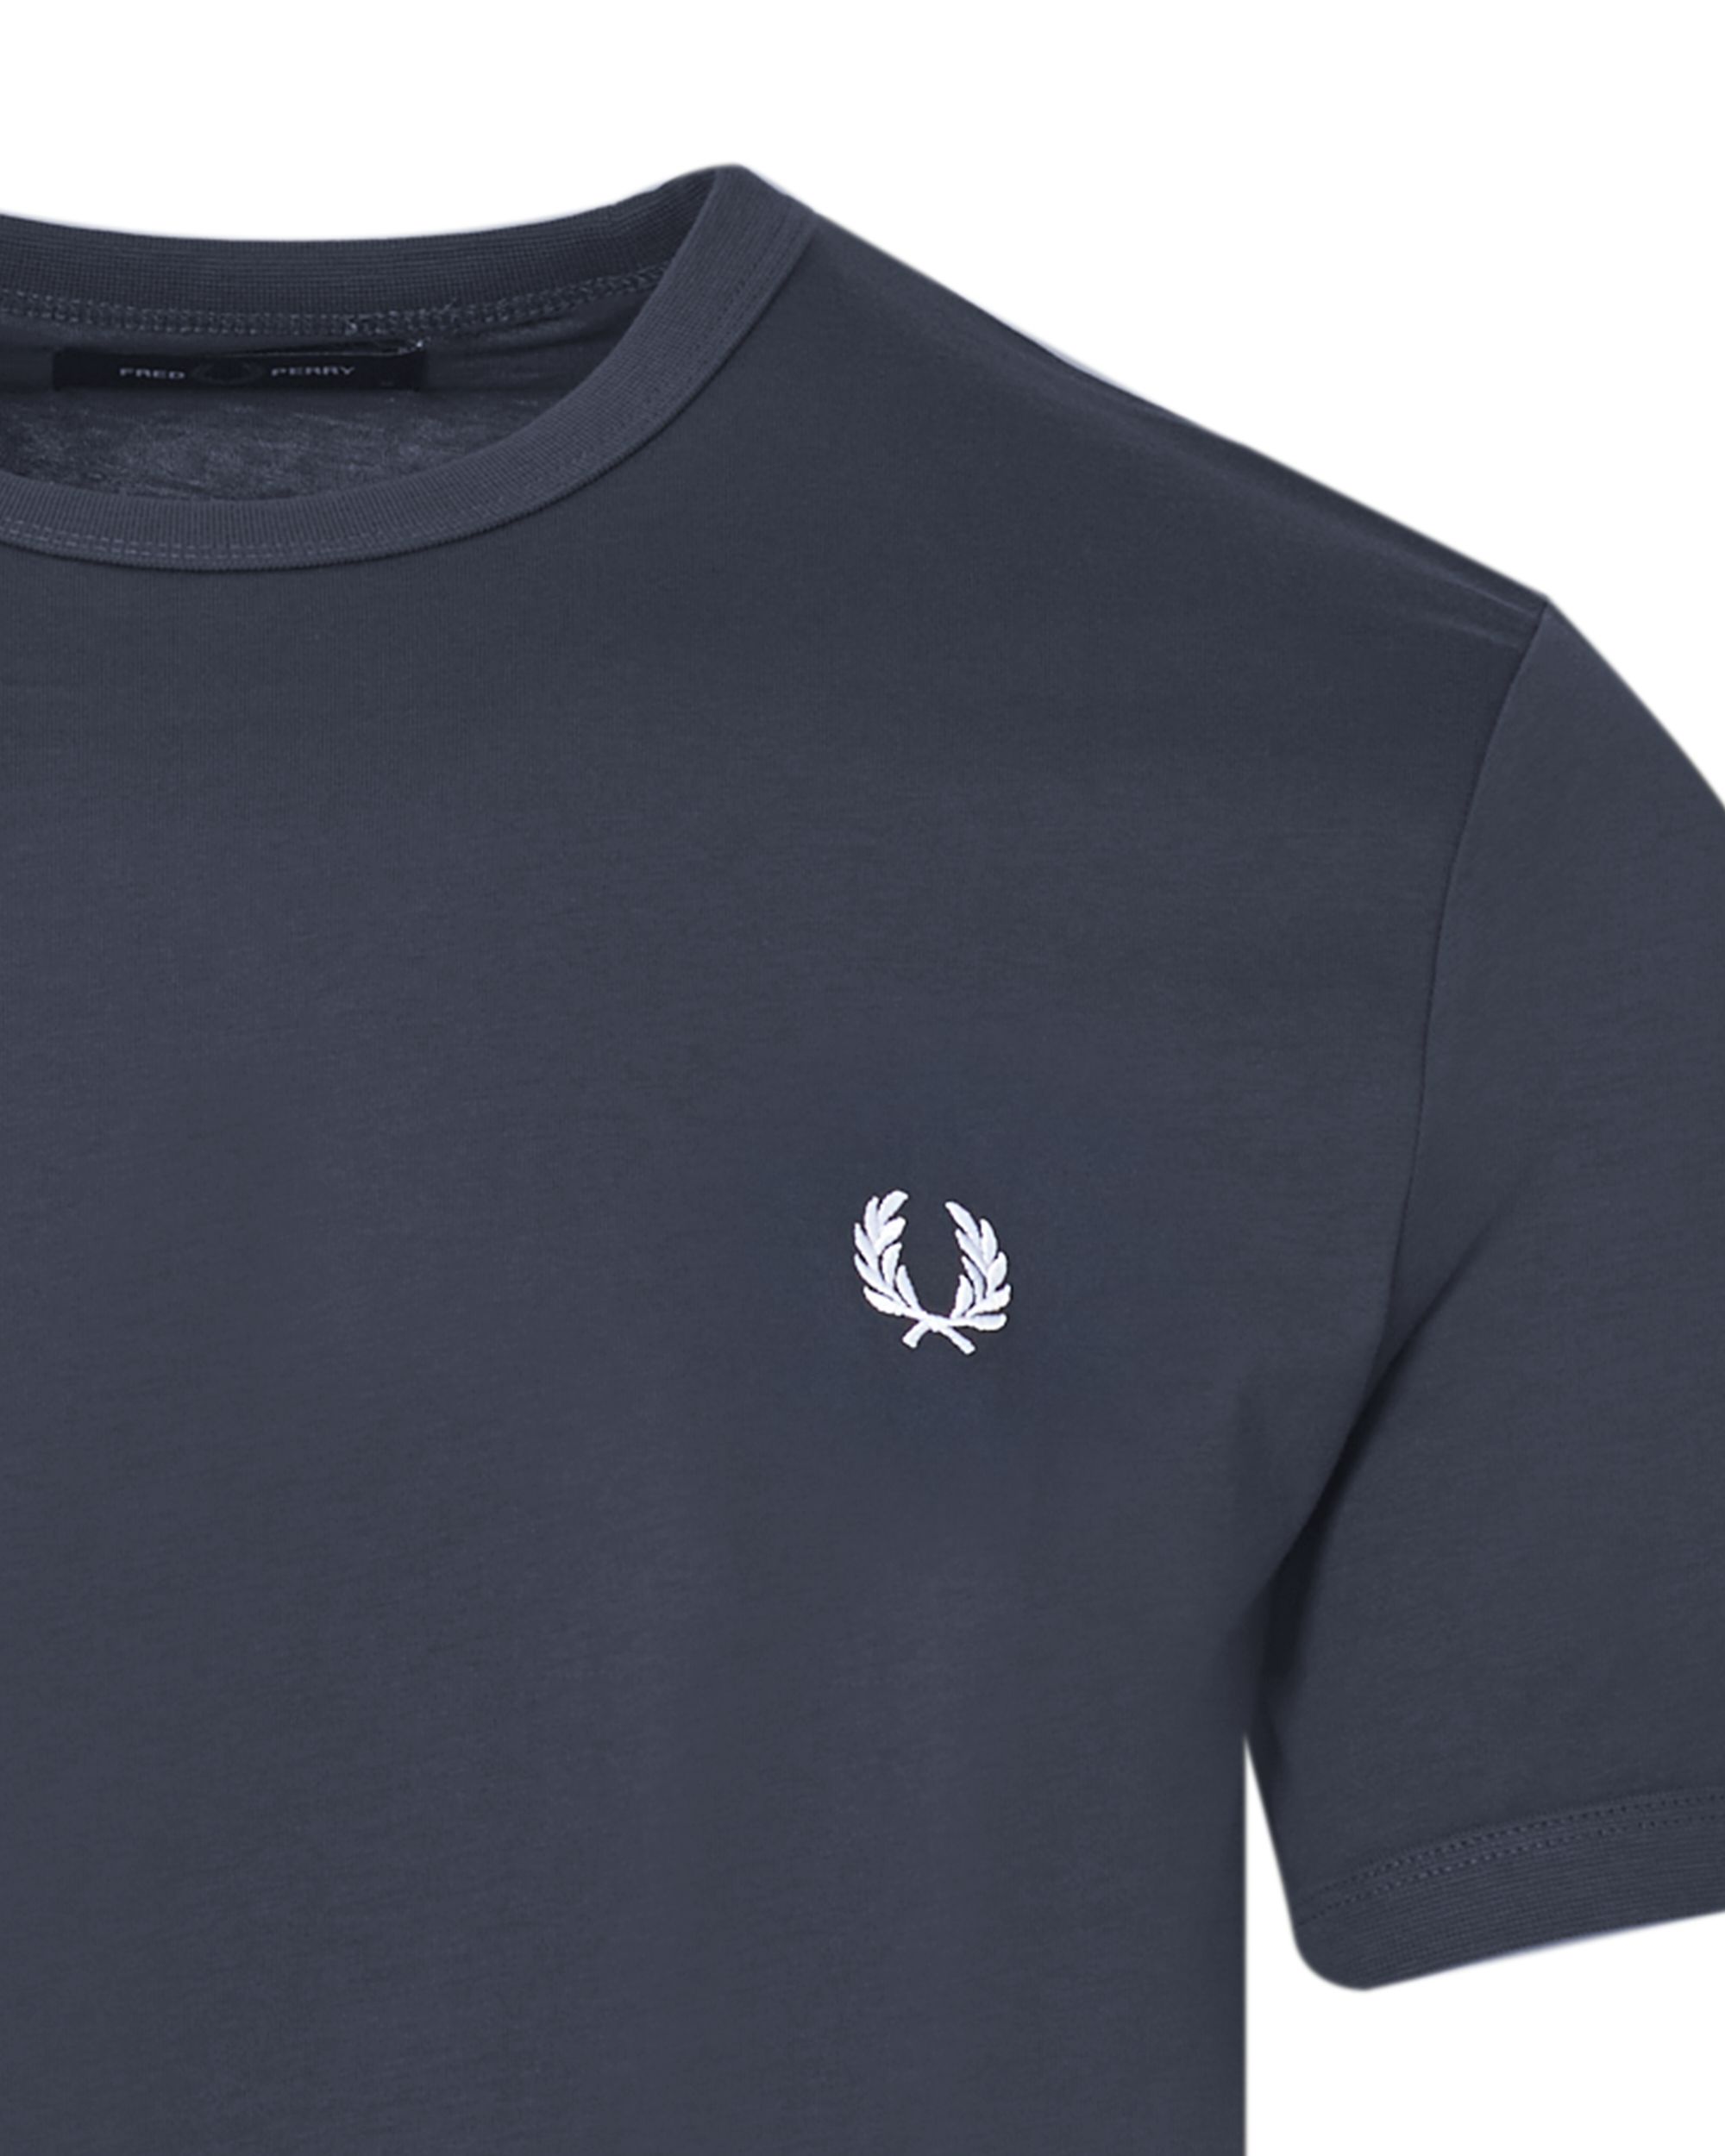 Fred Perry T-shirt KM Donker blauw 083517-001-L